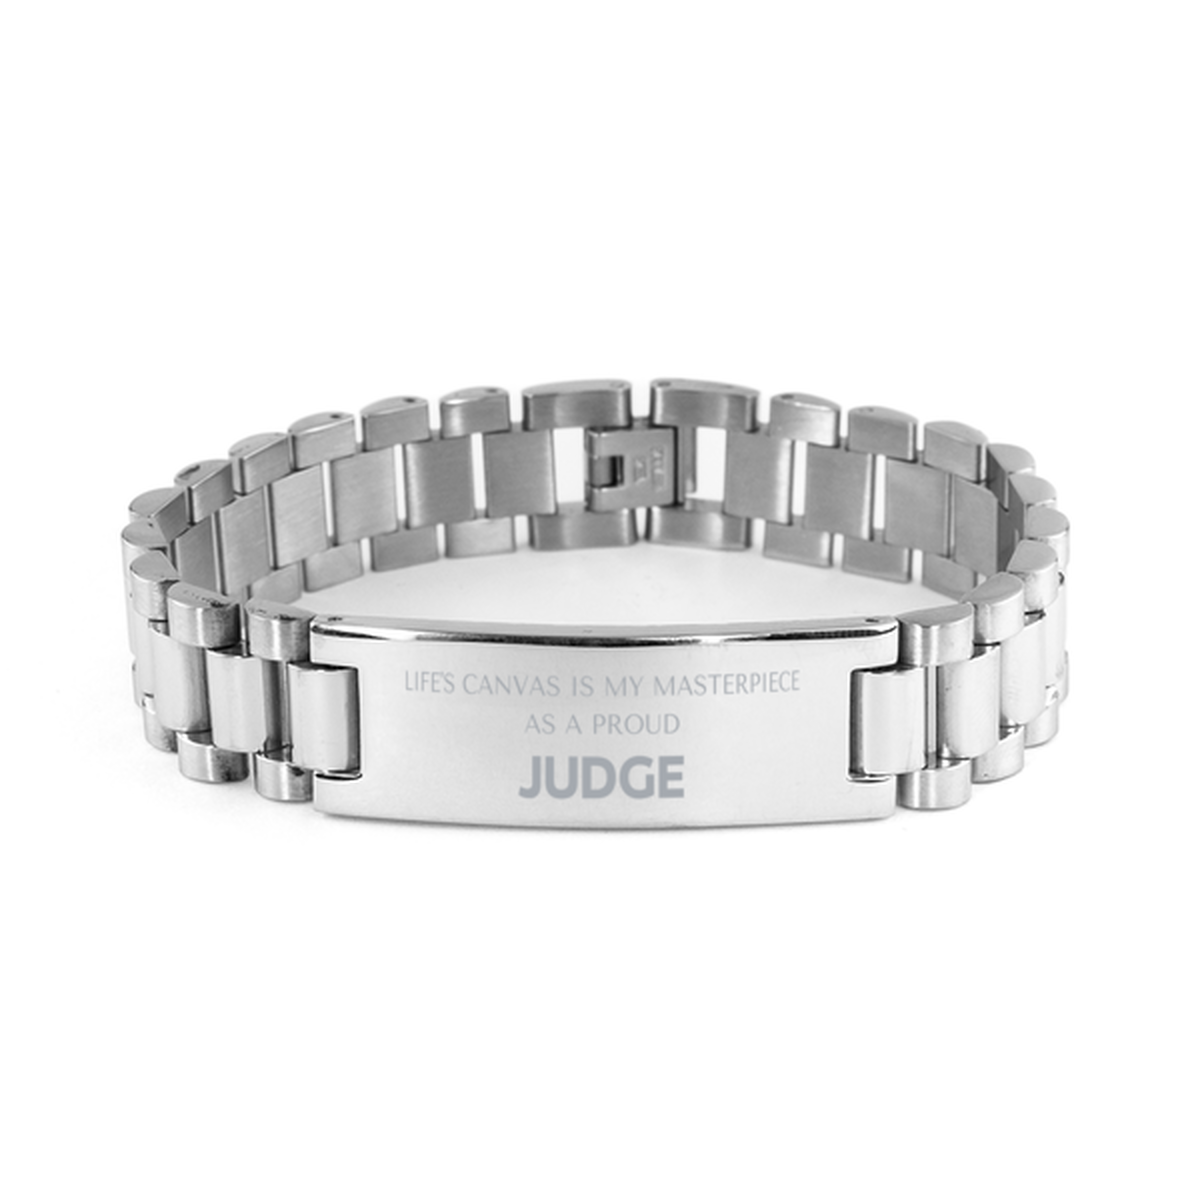 Proud Judge Gifts, Life's canvas is my masterpiece, Epic Birthday Christmas Unique Ladder Stainless Steel Bracelet For Judge, Coworkers, Men, Women, Friends